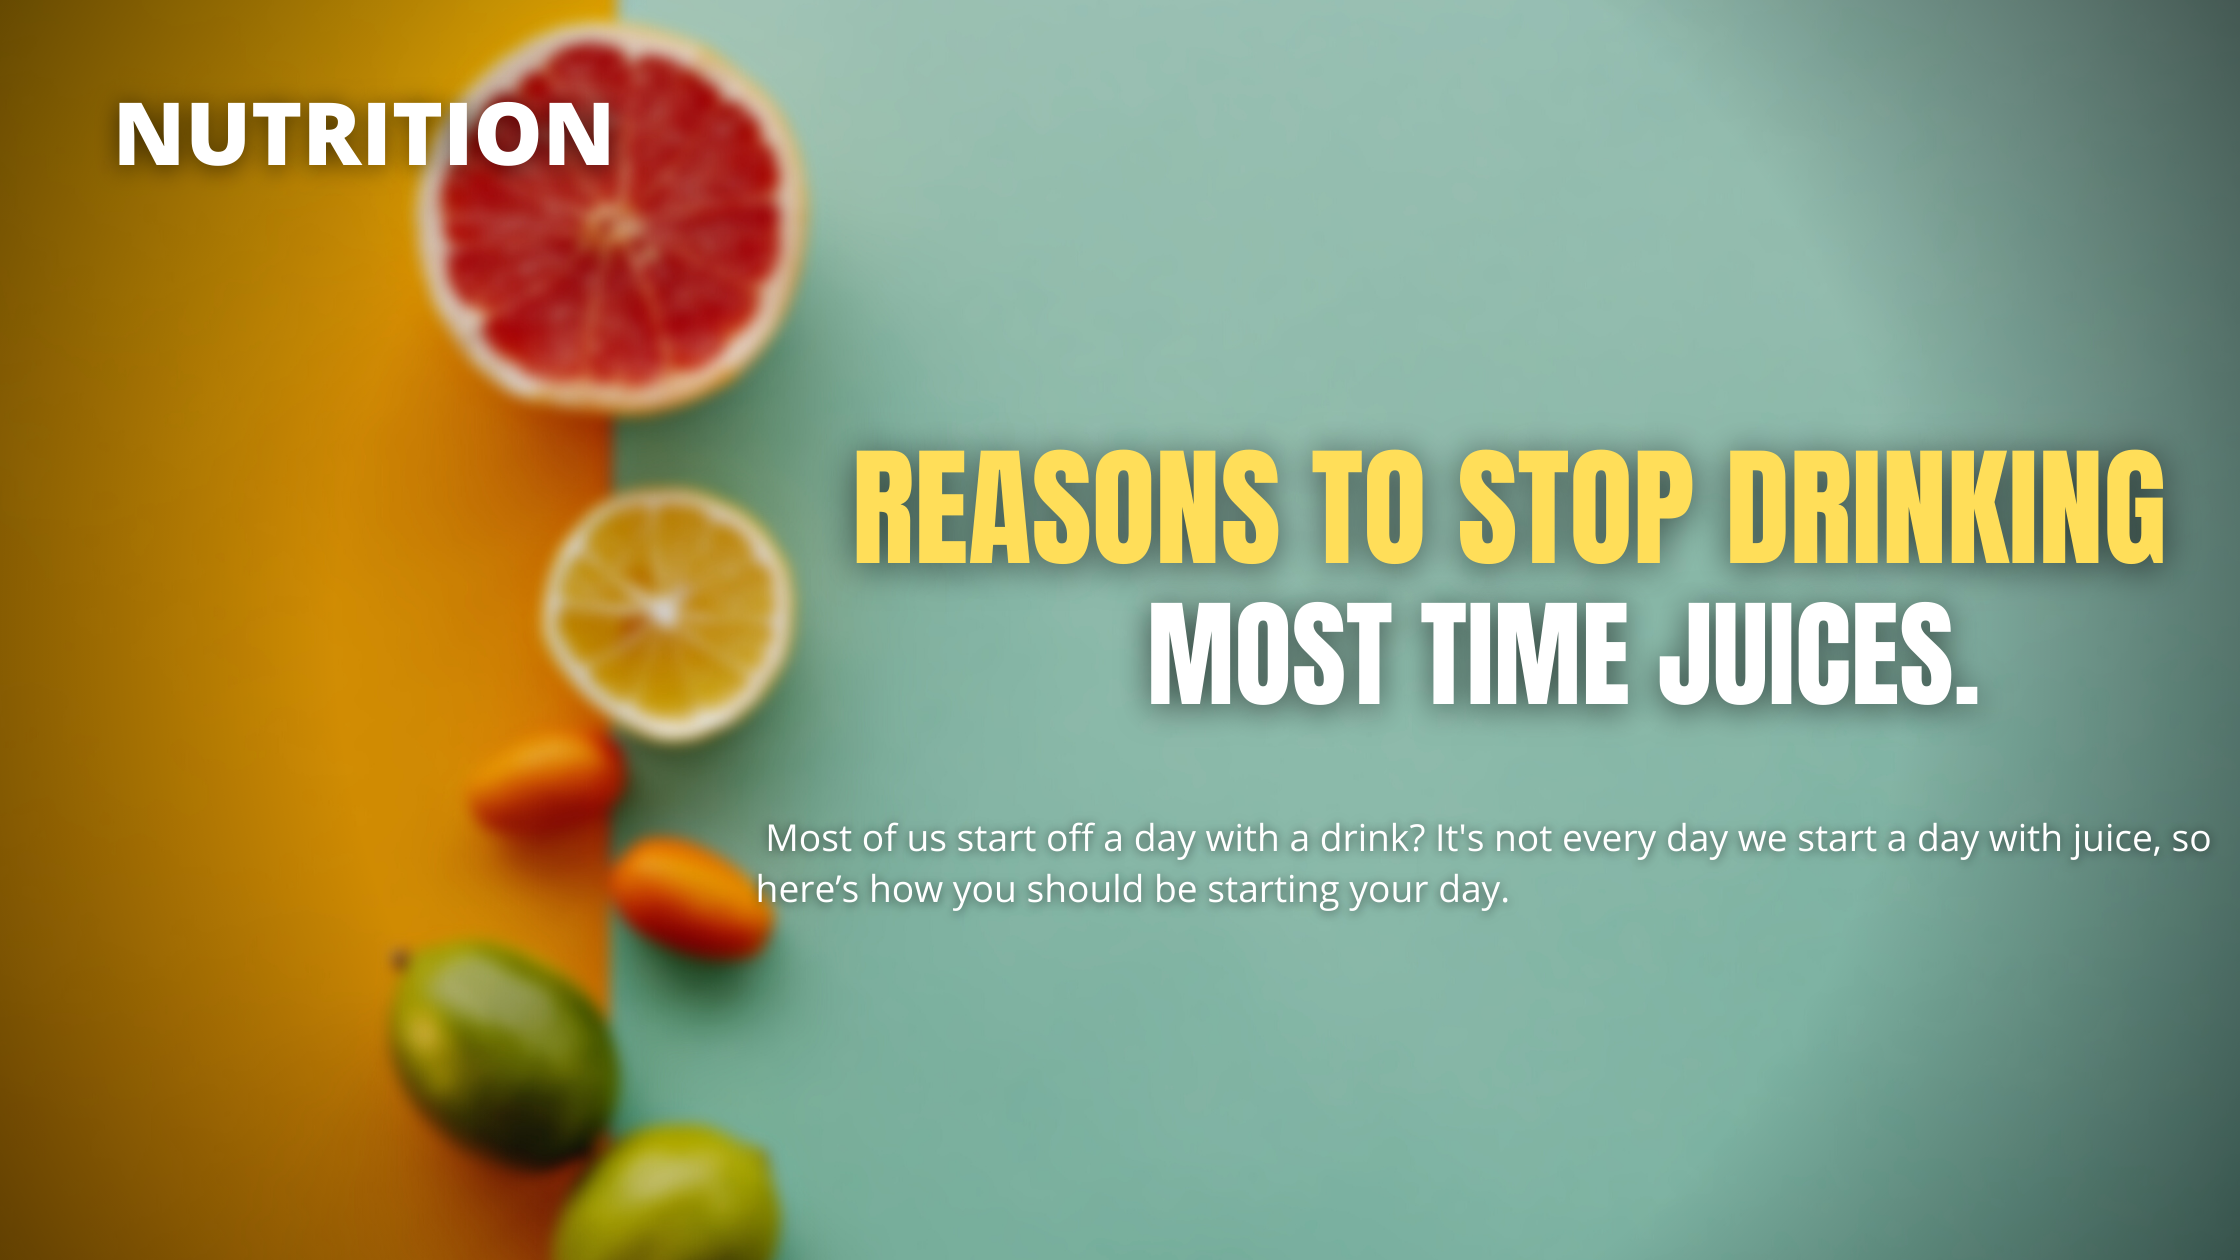 Reasons why should you stop drinking most time juices